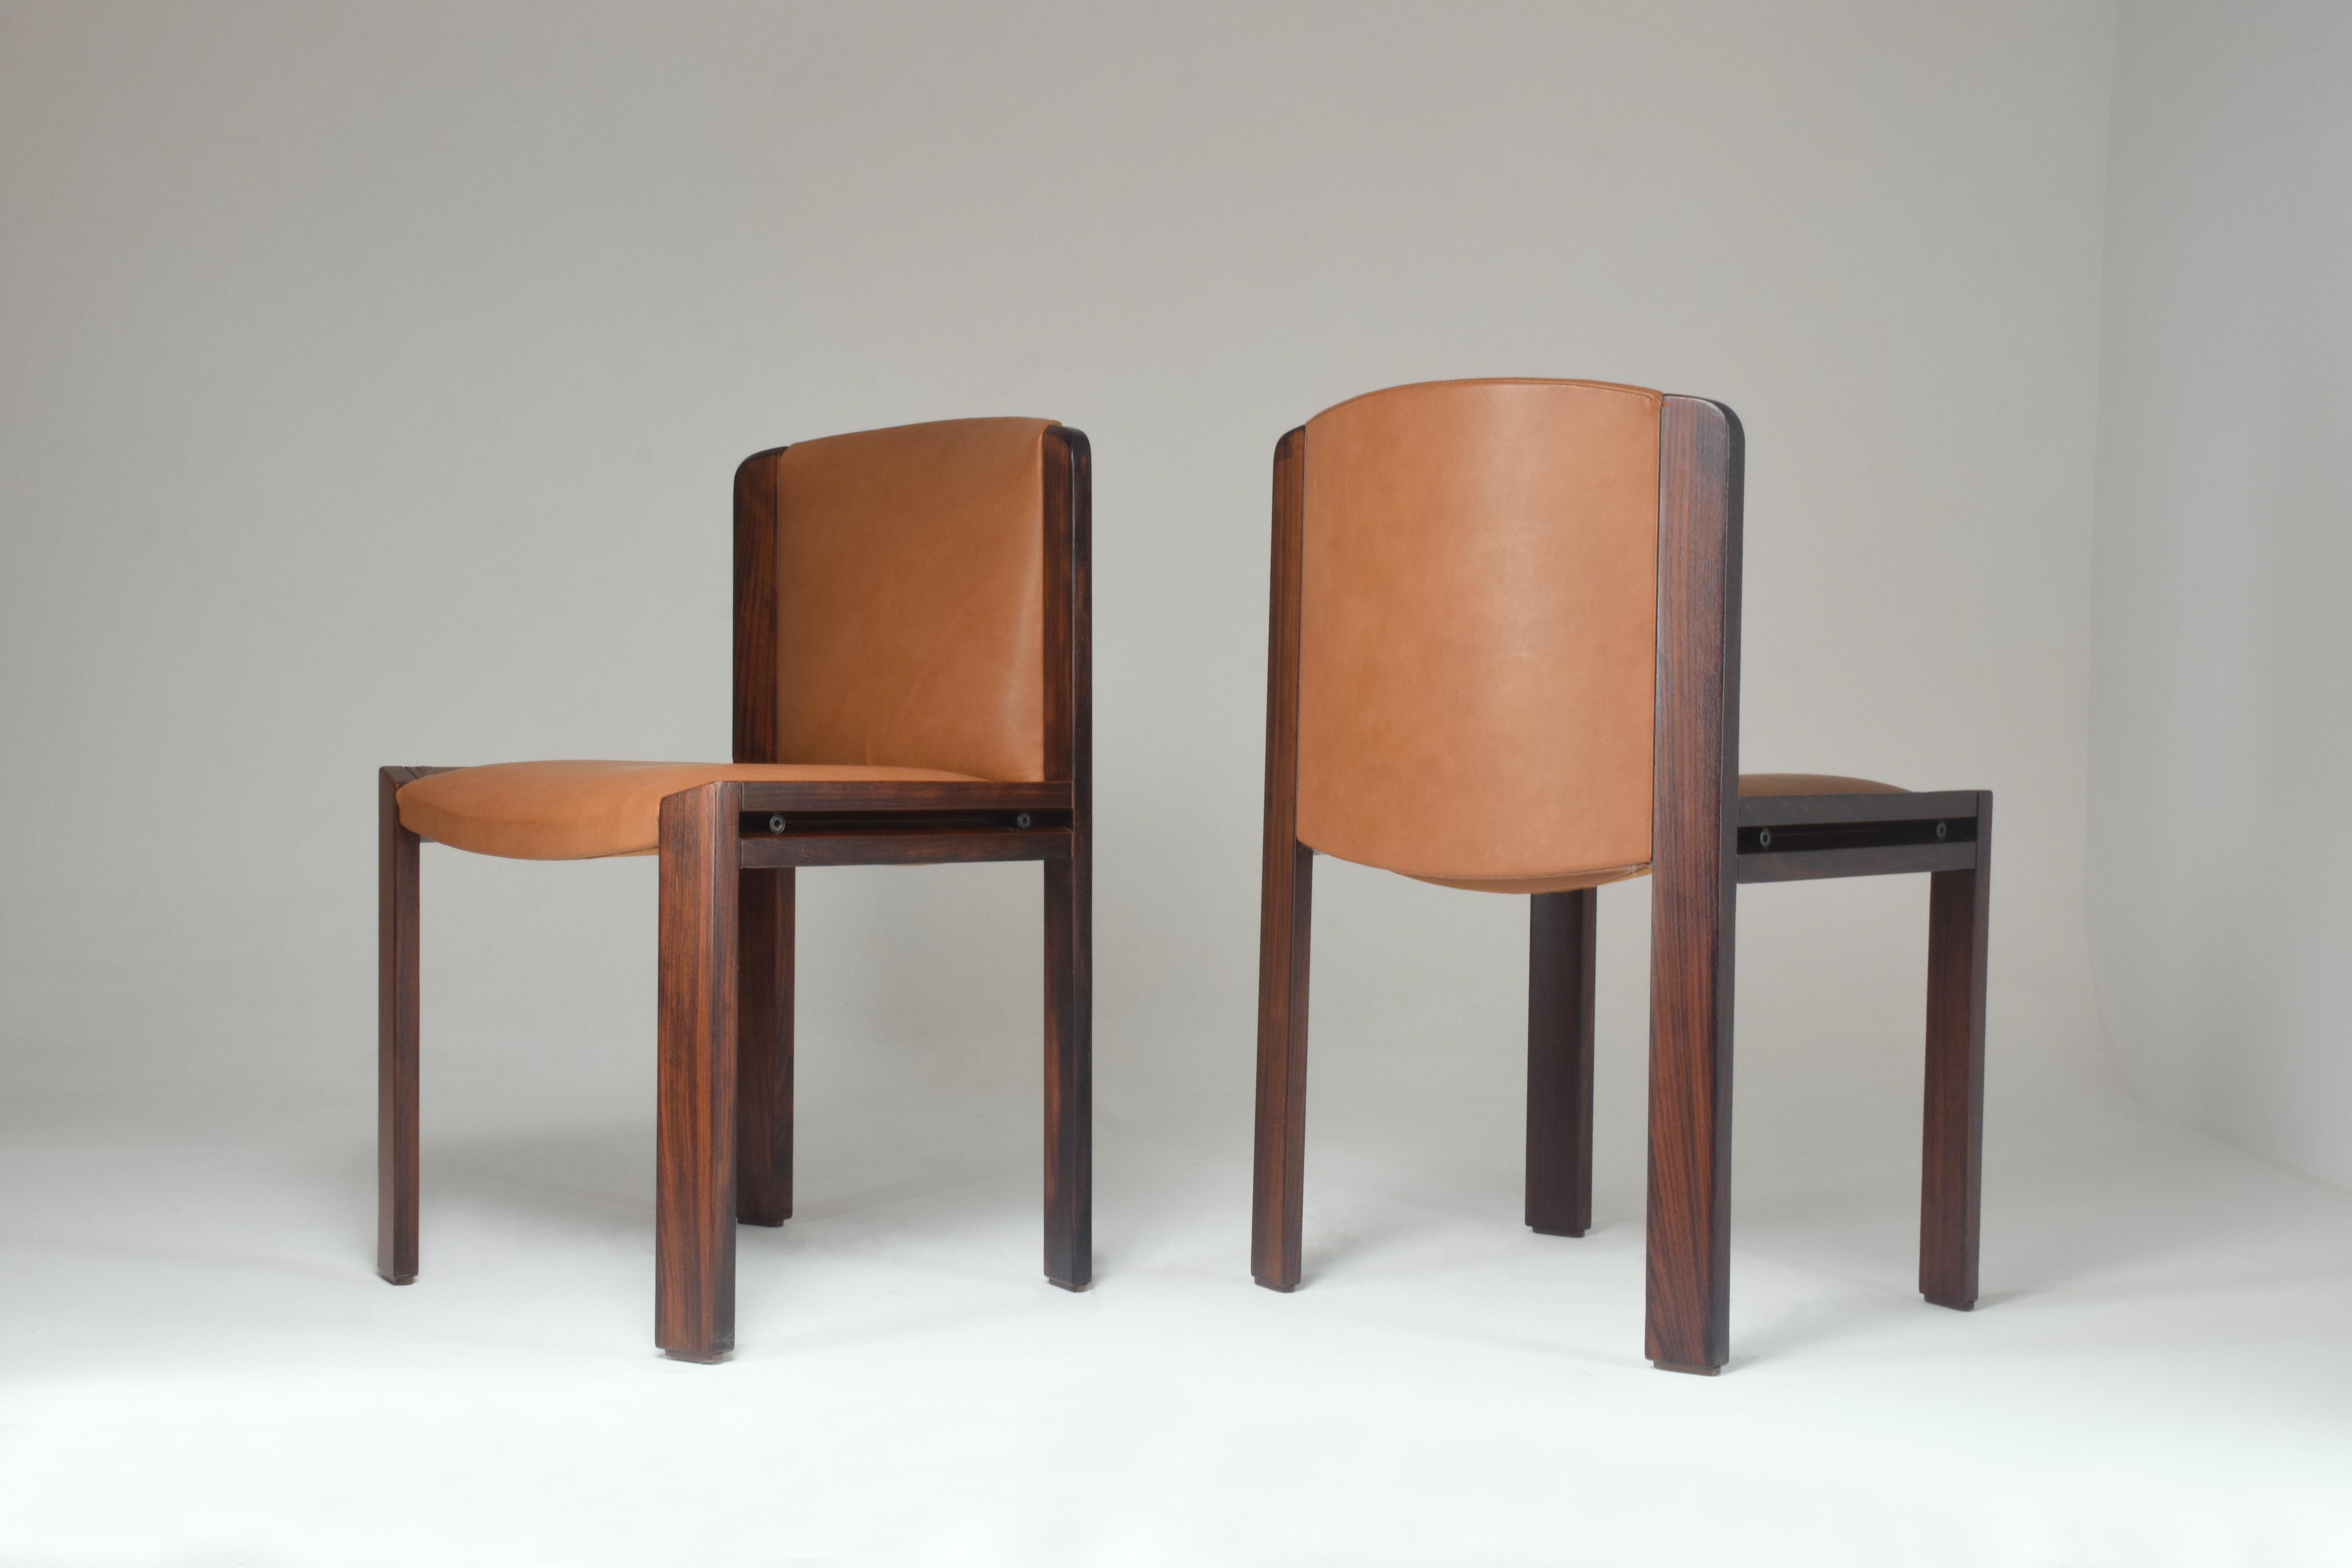 Two mid-20th-century chairs designed by Joe Colombo for Pozzi from the 1960's. These accent or side chairs stand out with their bold oak frame and beautifully carved slits on the sides. Impeccably restored by our team with new camel brown leather